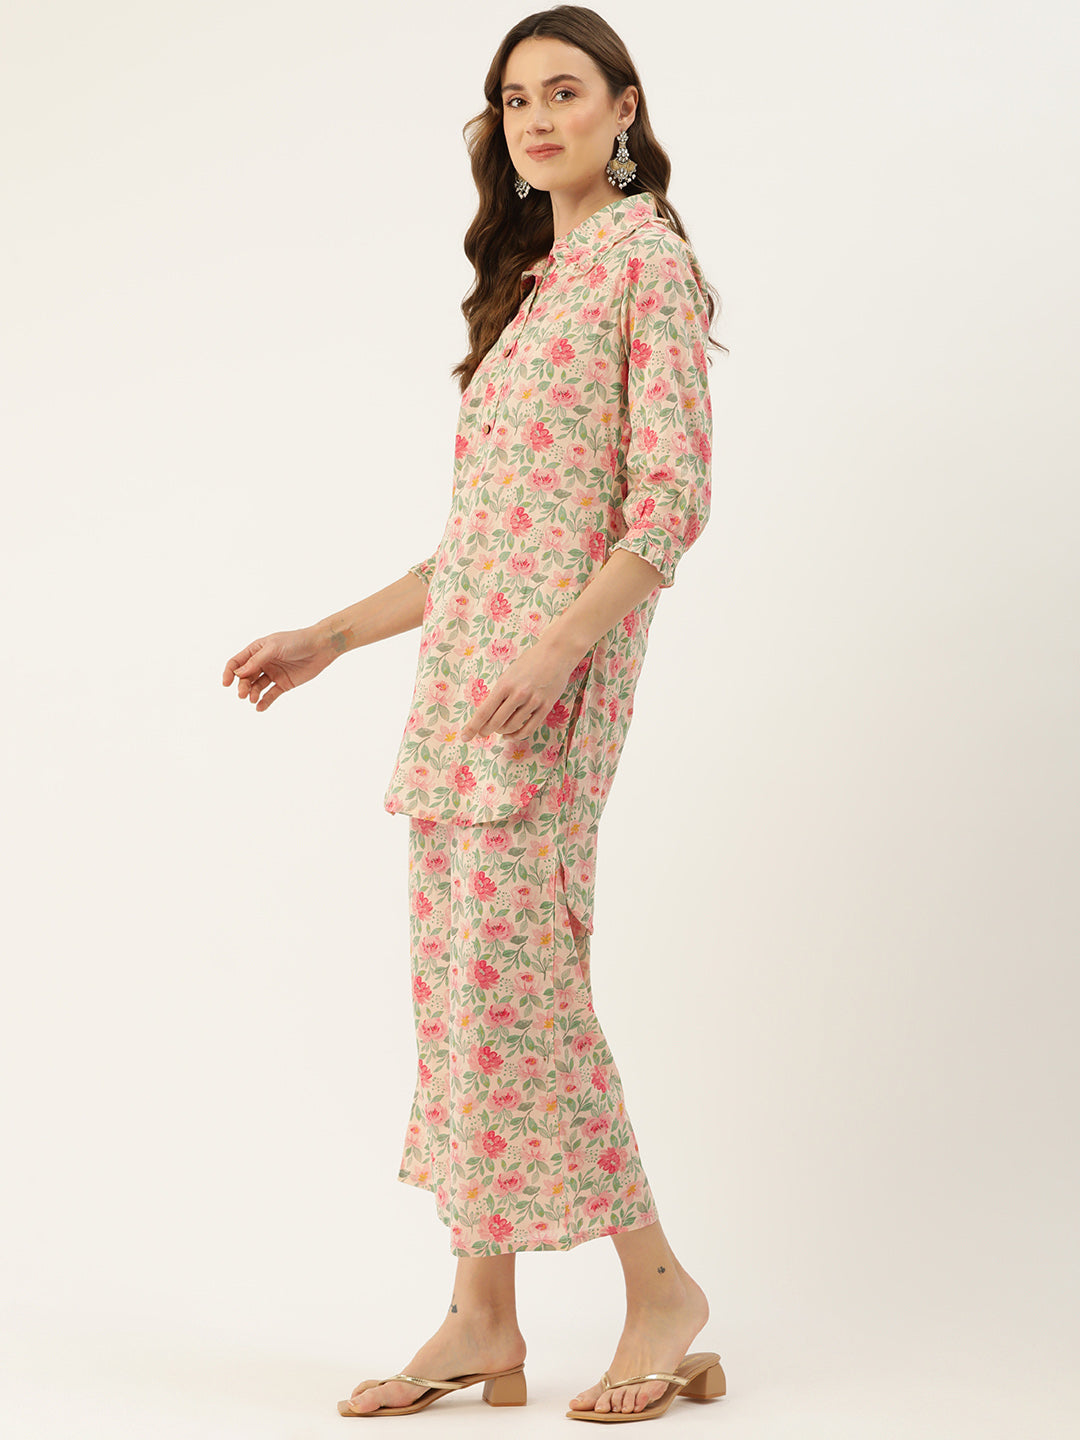 Floral Printed Pure Cotton Night Suits FRLW9049